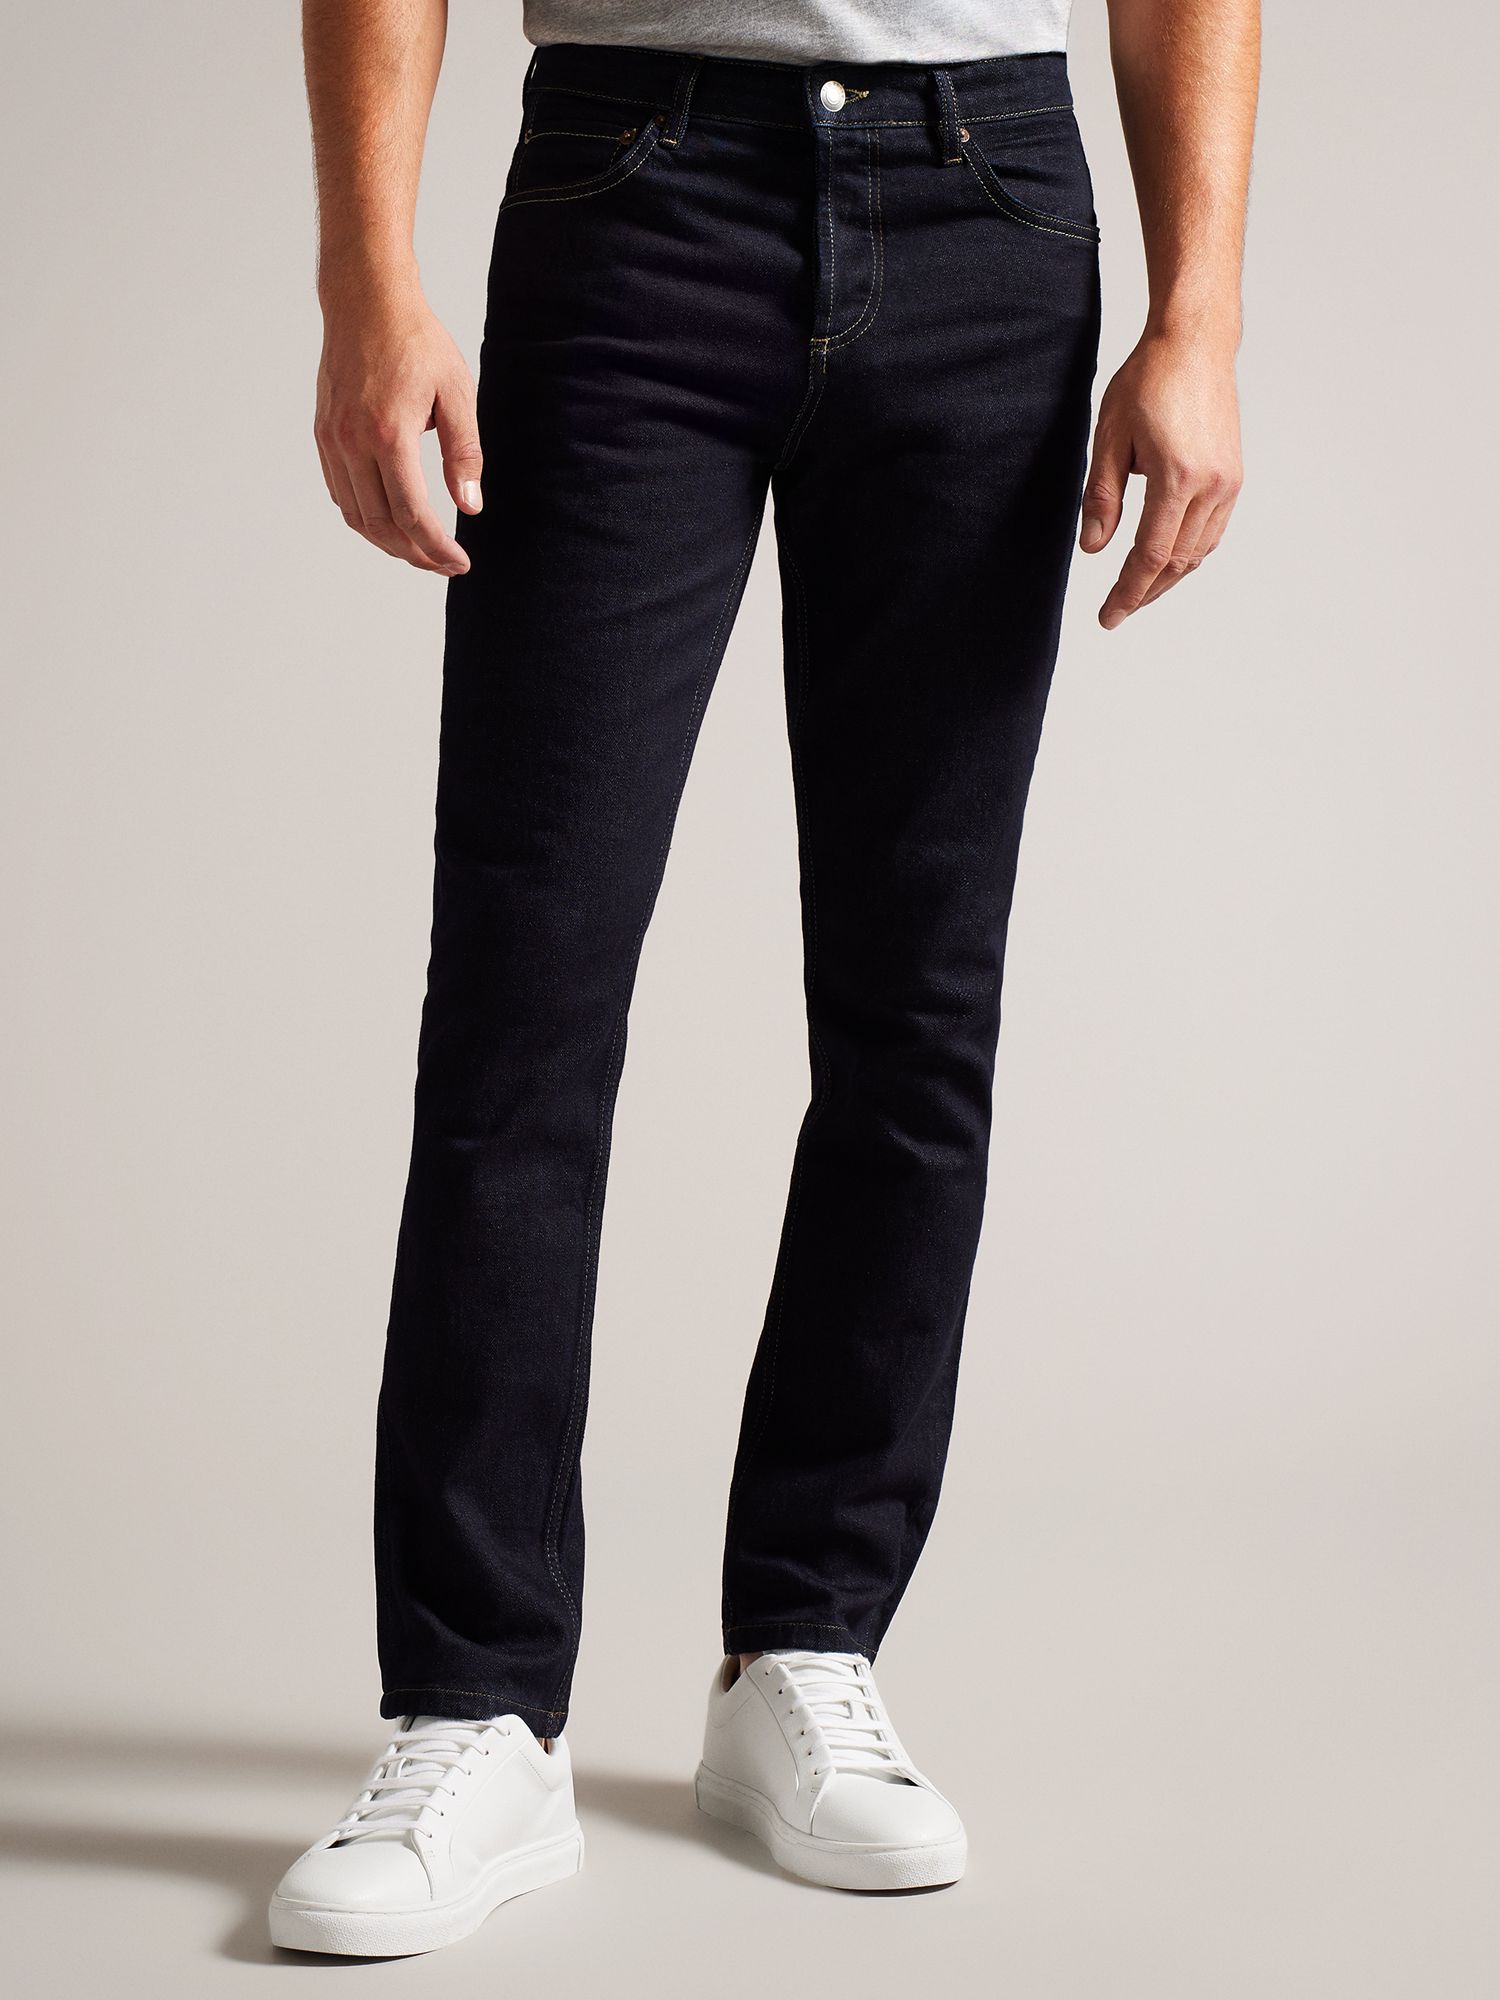 Buy Solid Black Skinny Comfort Stretch Jeans from the Next UK online shop